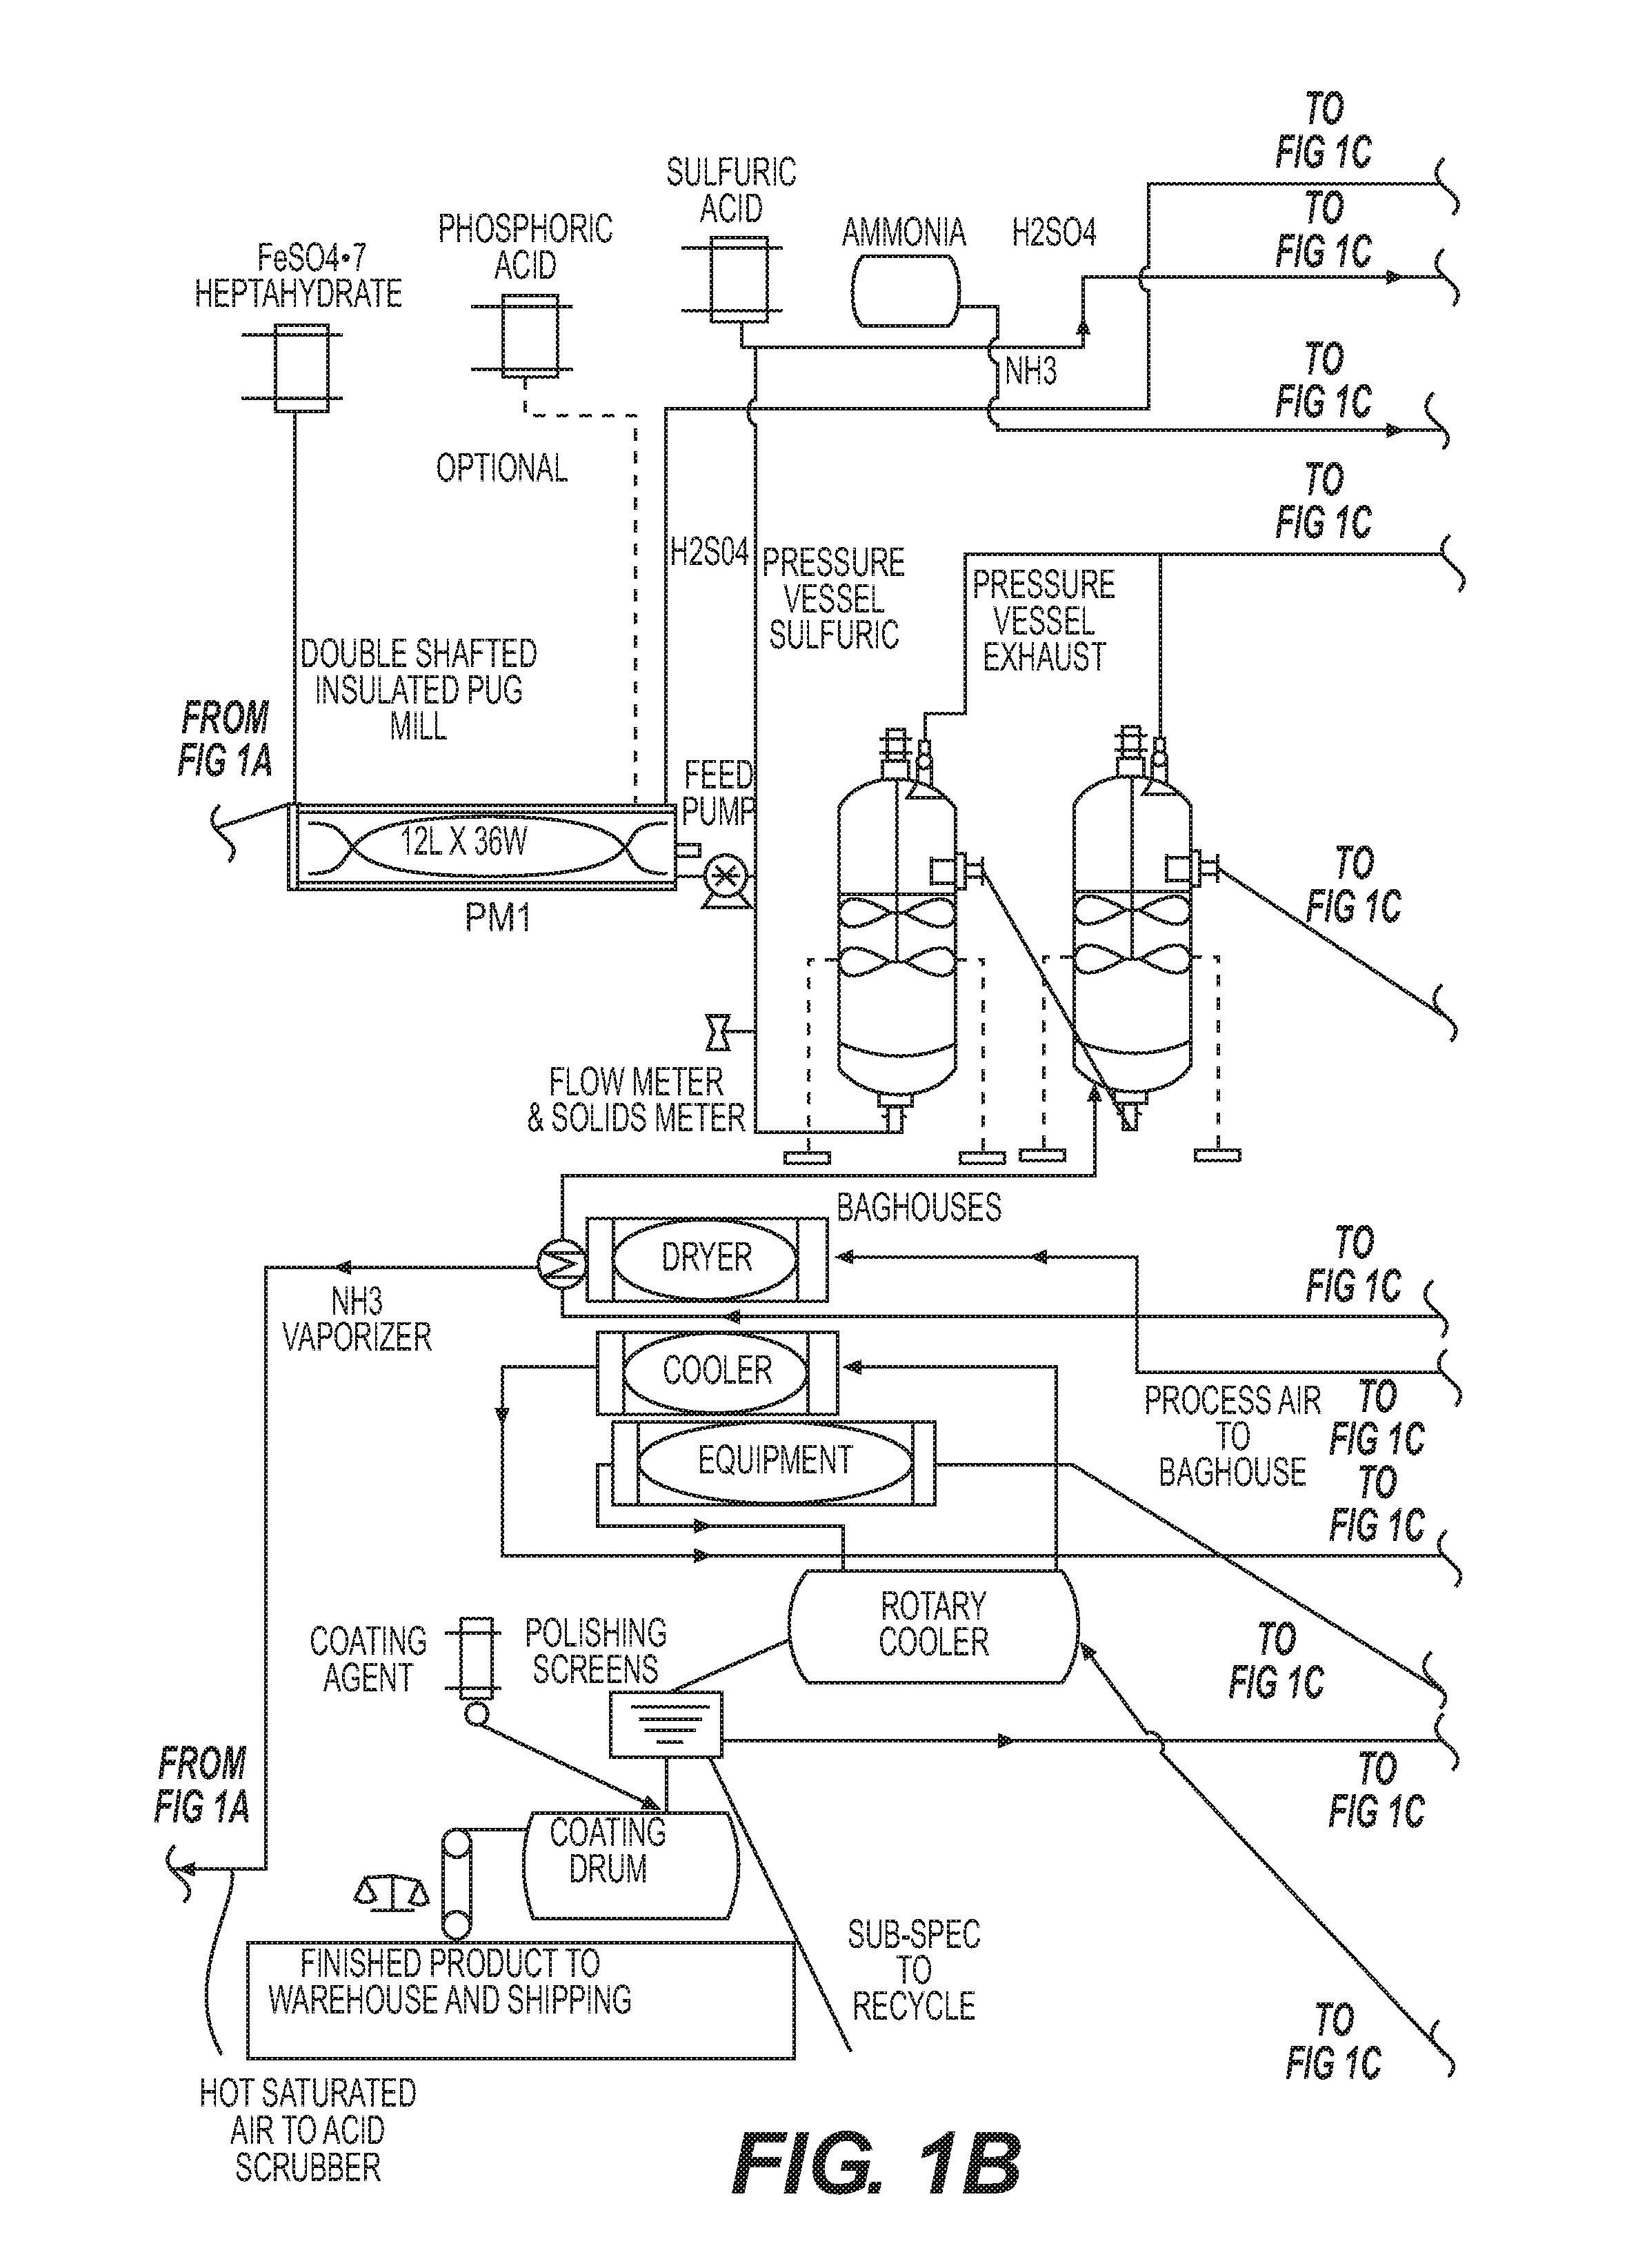 High Value Organic Containing Fertilizers and Methods of Manufacture